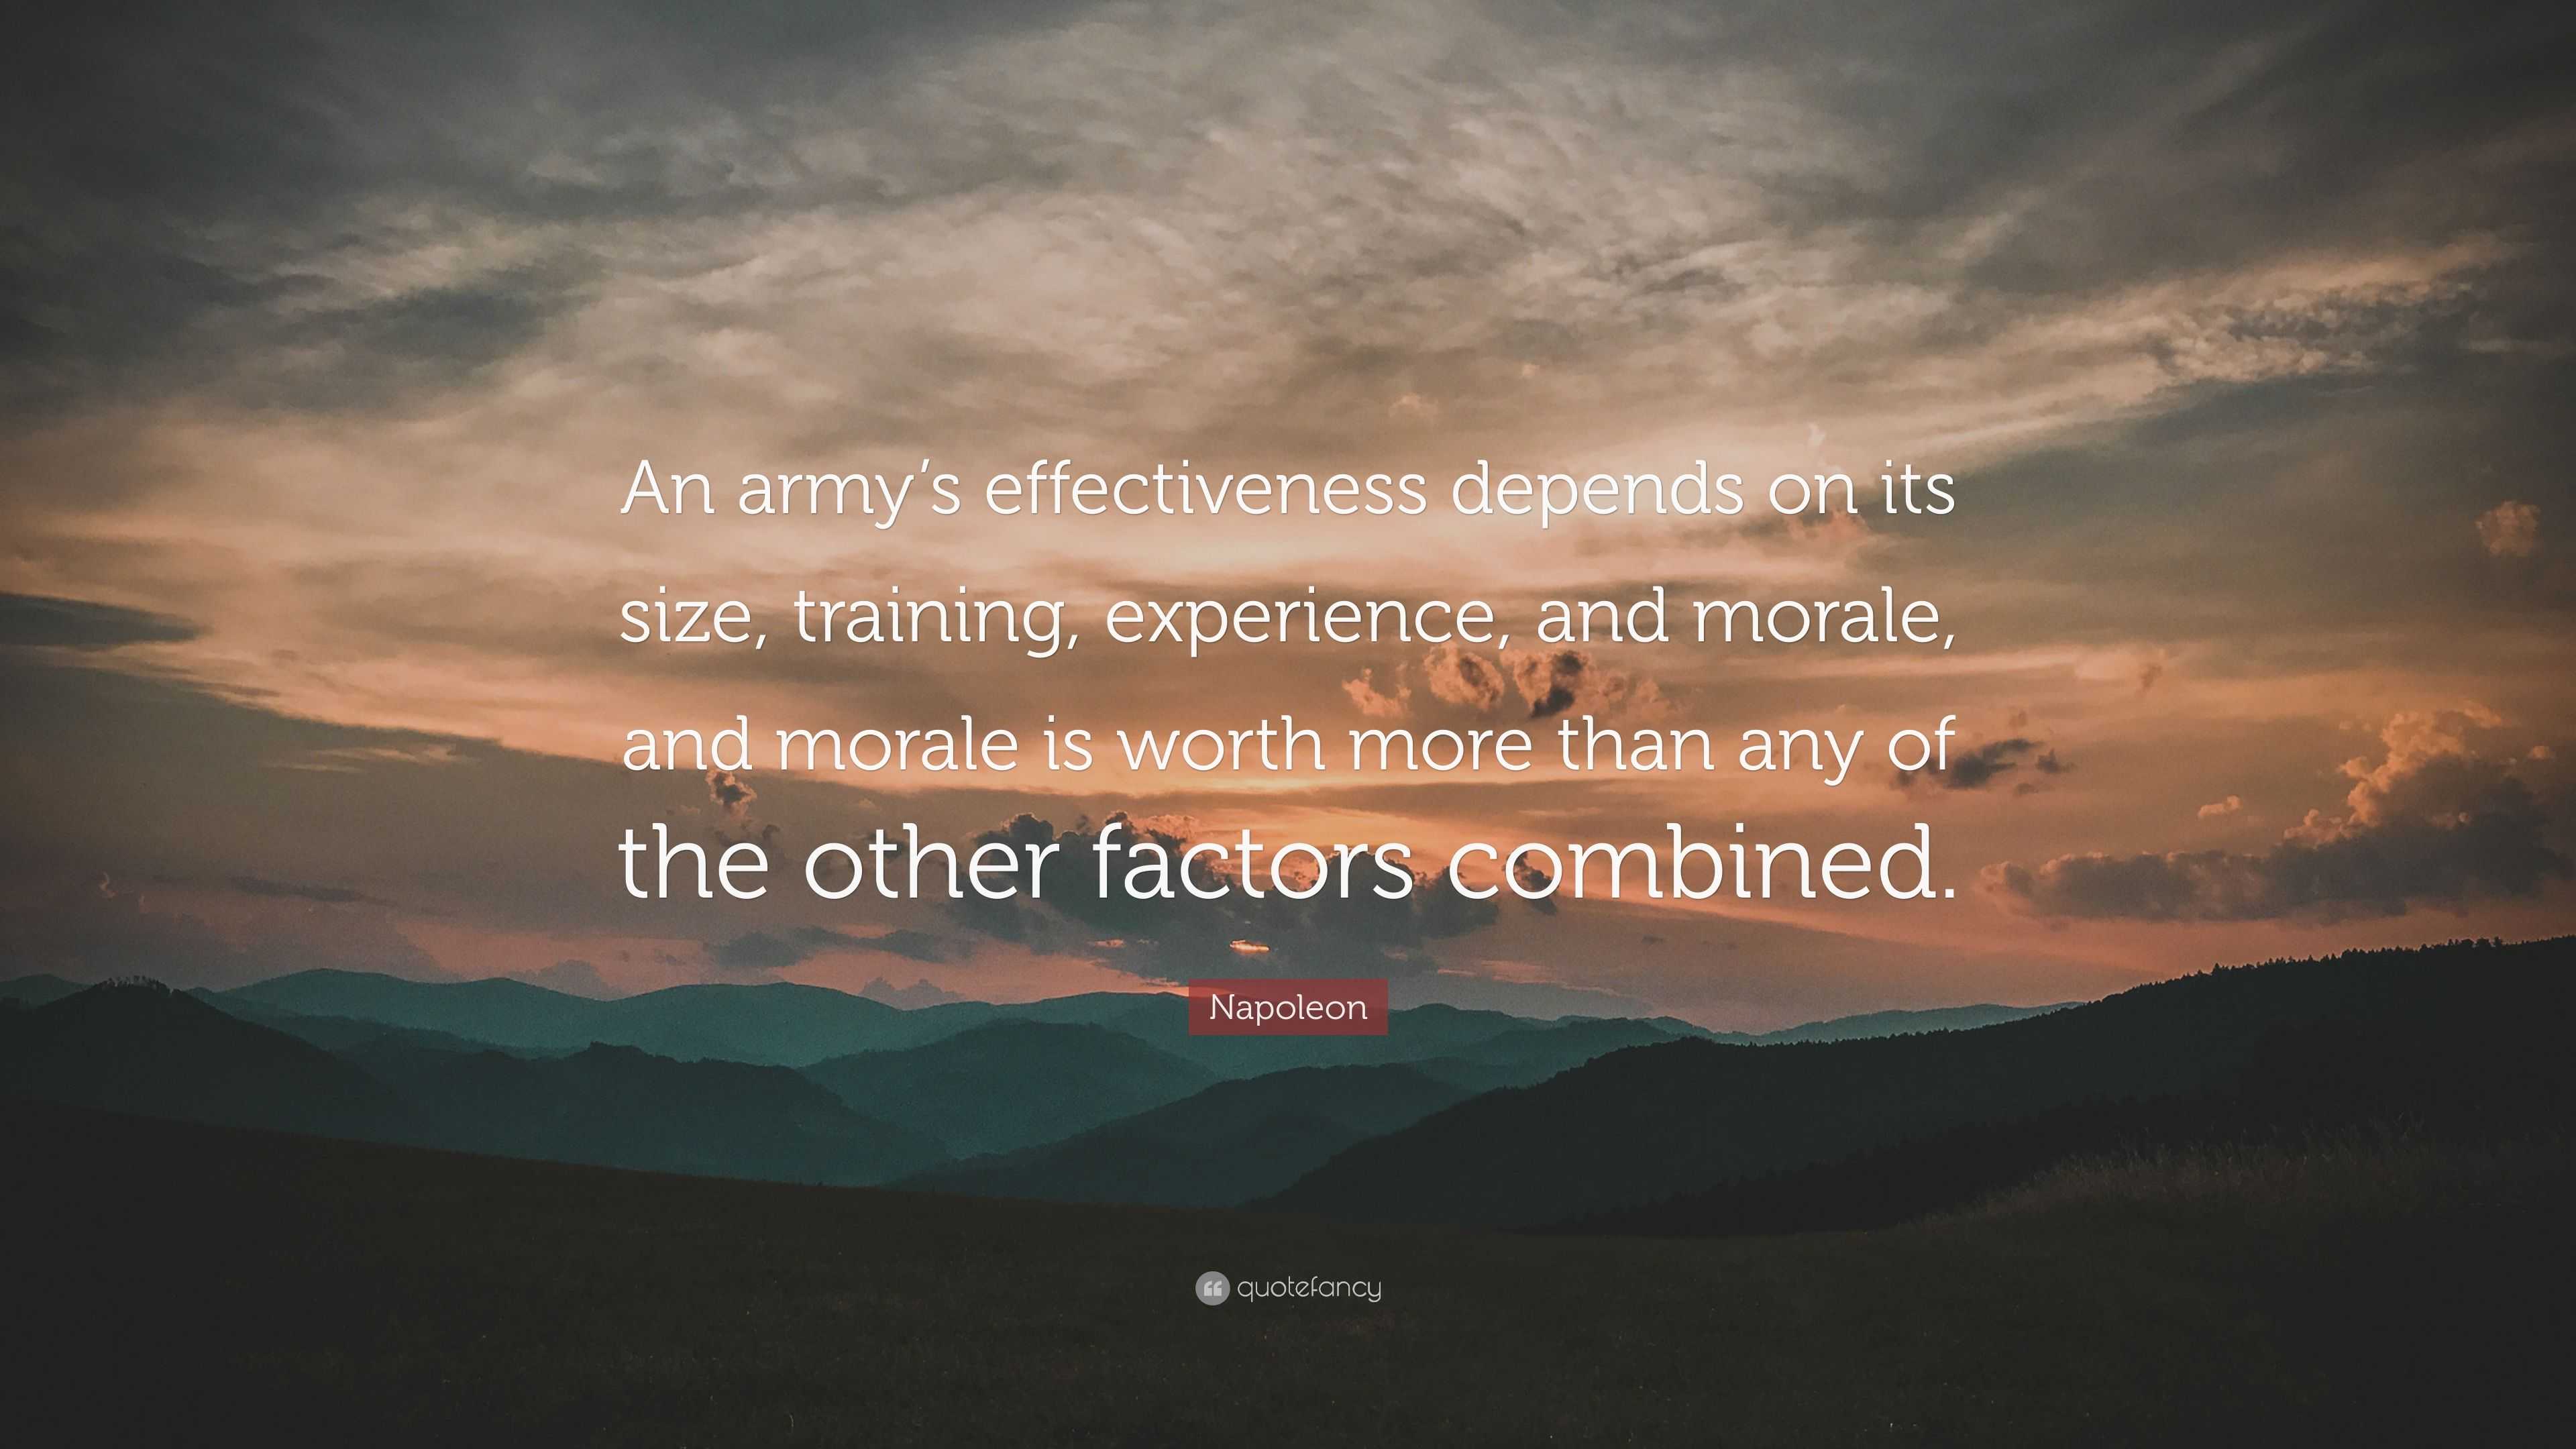 Napoleon Quote: “An army’s effectiveness depends on its size, training